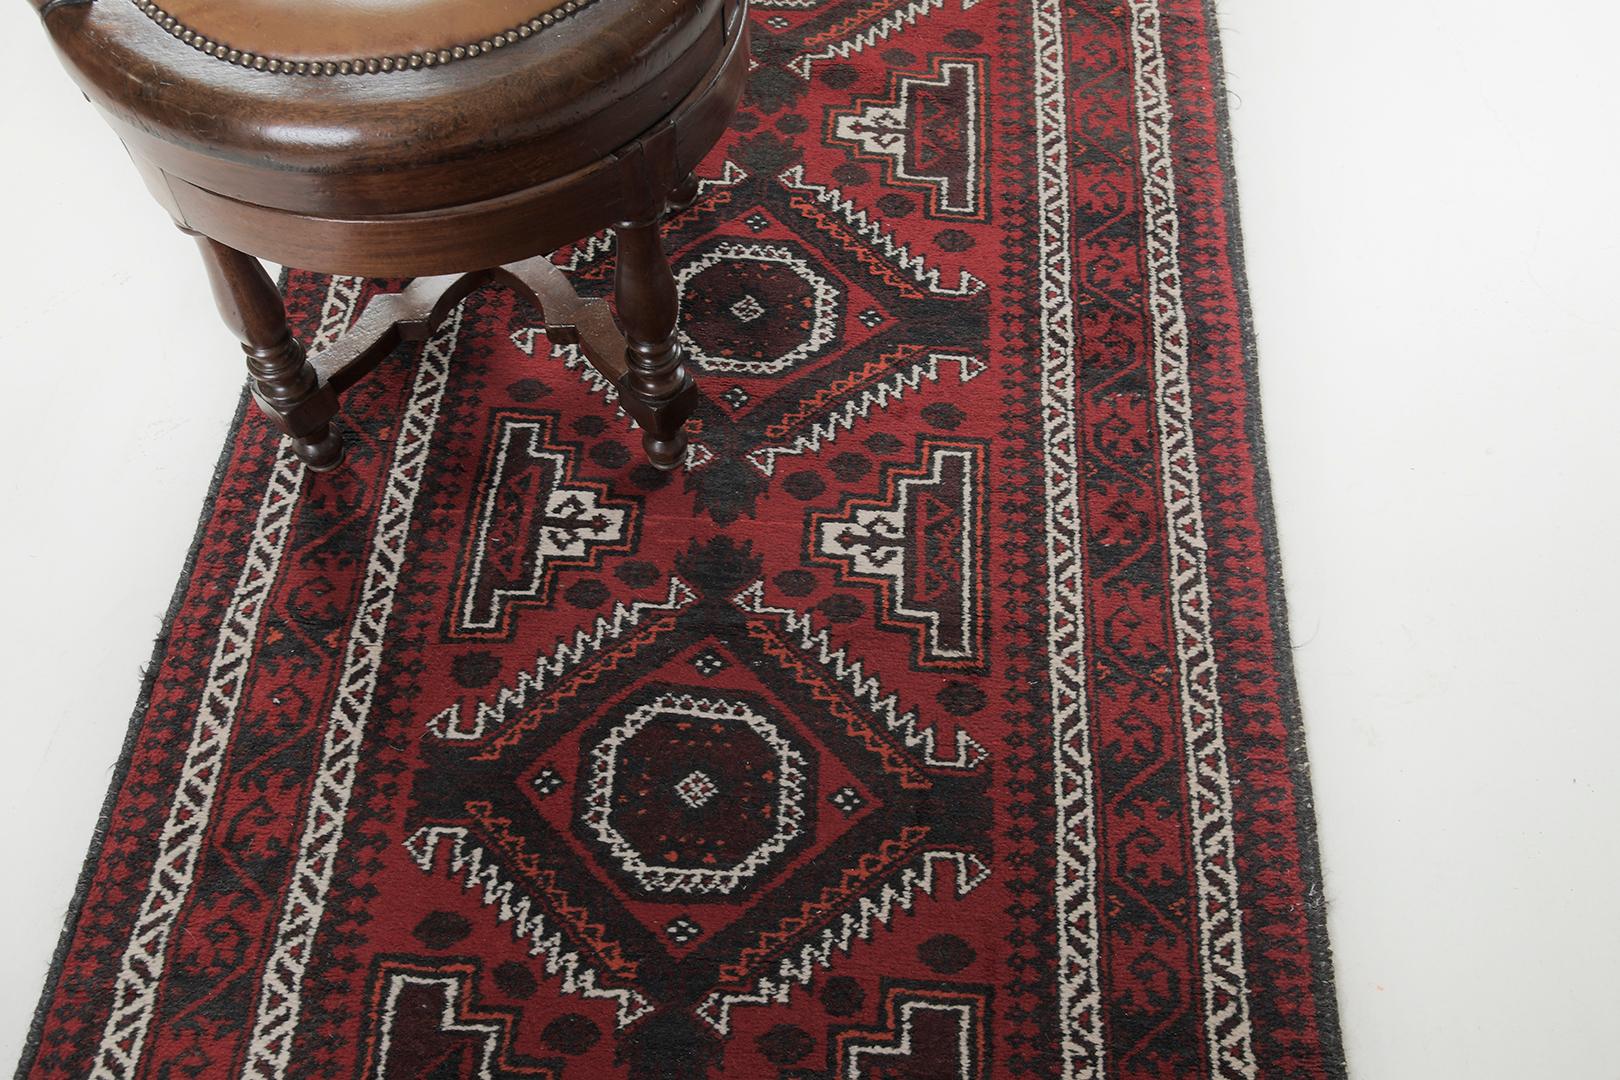 Our journey in the search for the best antiques has led us to this authentic and antique Persian Belouch runner rug. This centerpiece is made of wool in red dyes and the hatch pattern calls attention to your wall or floor application. A remarkable